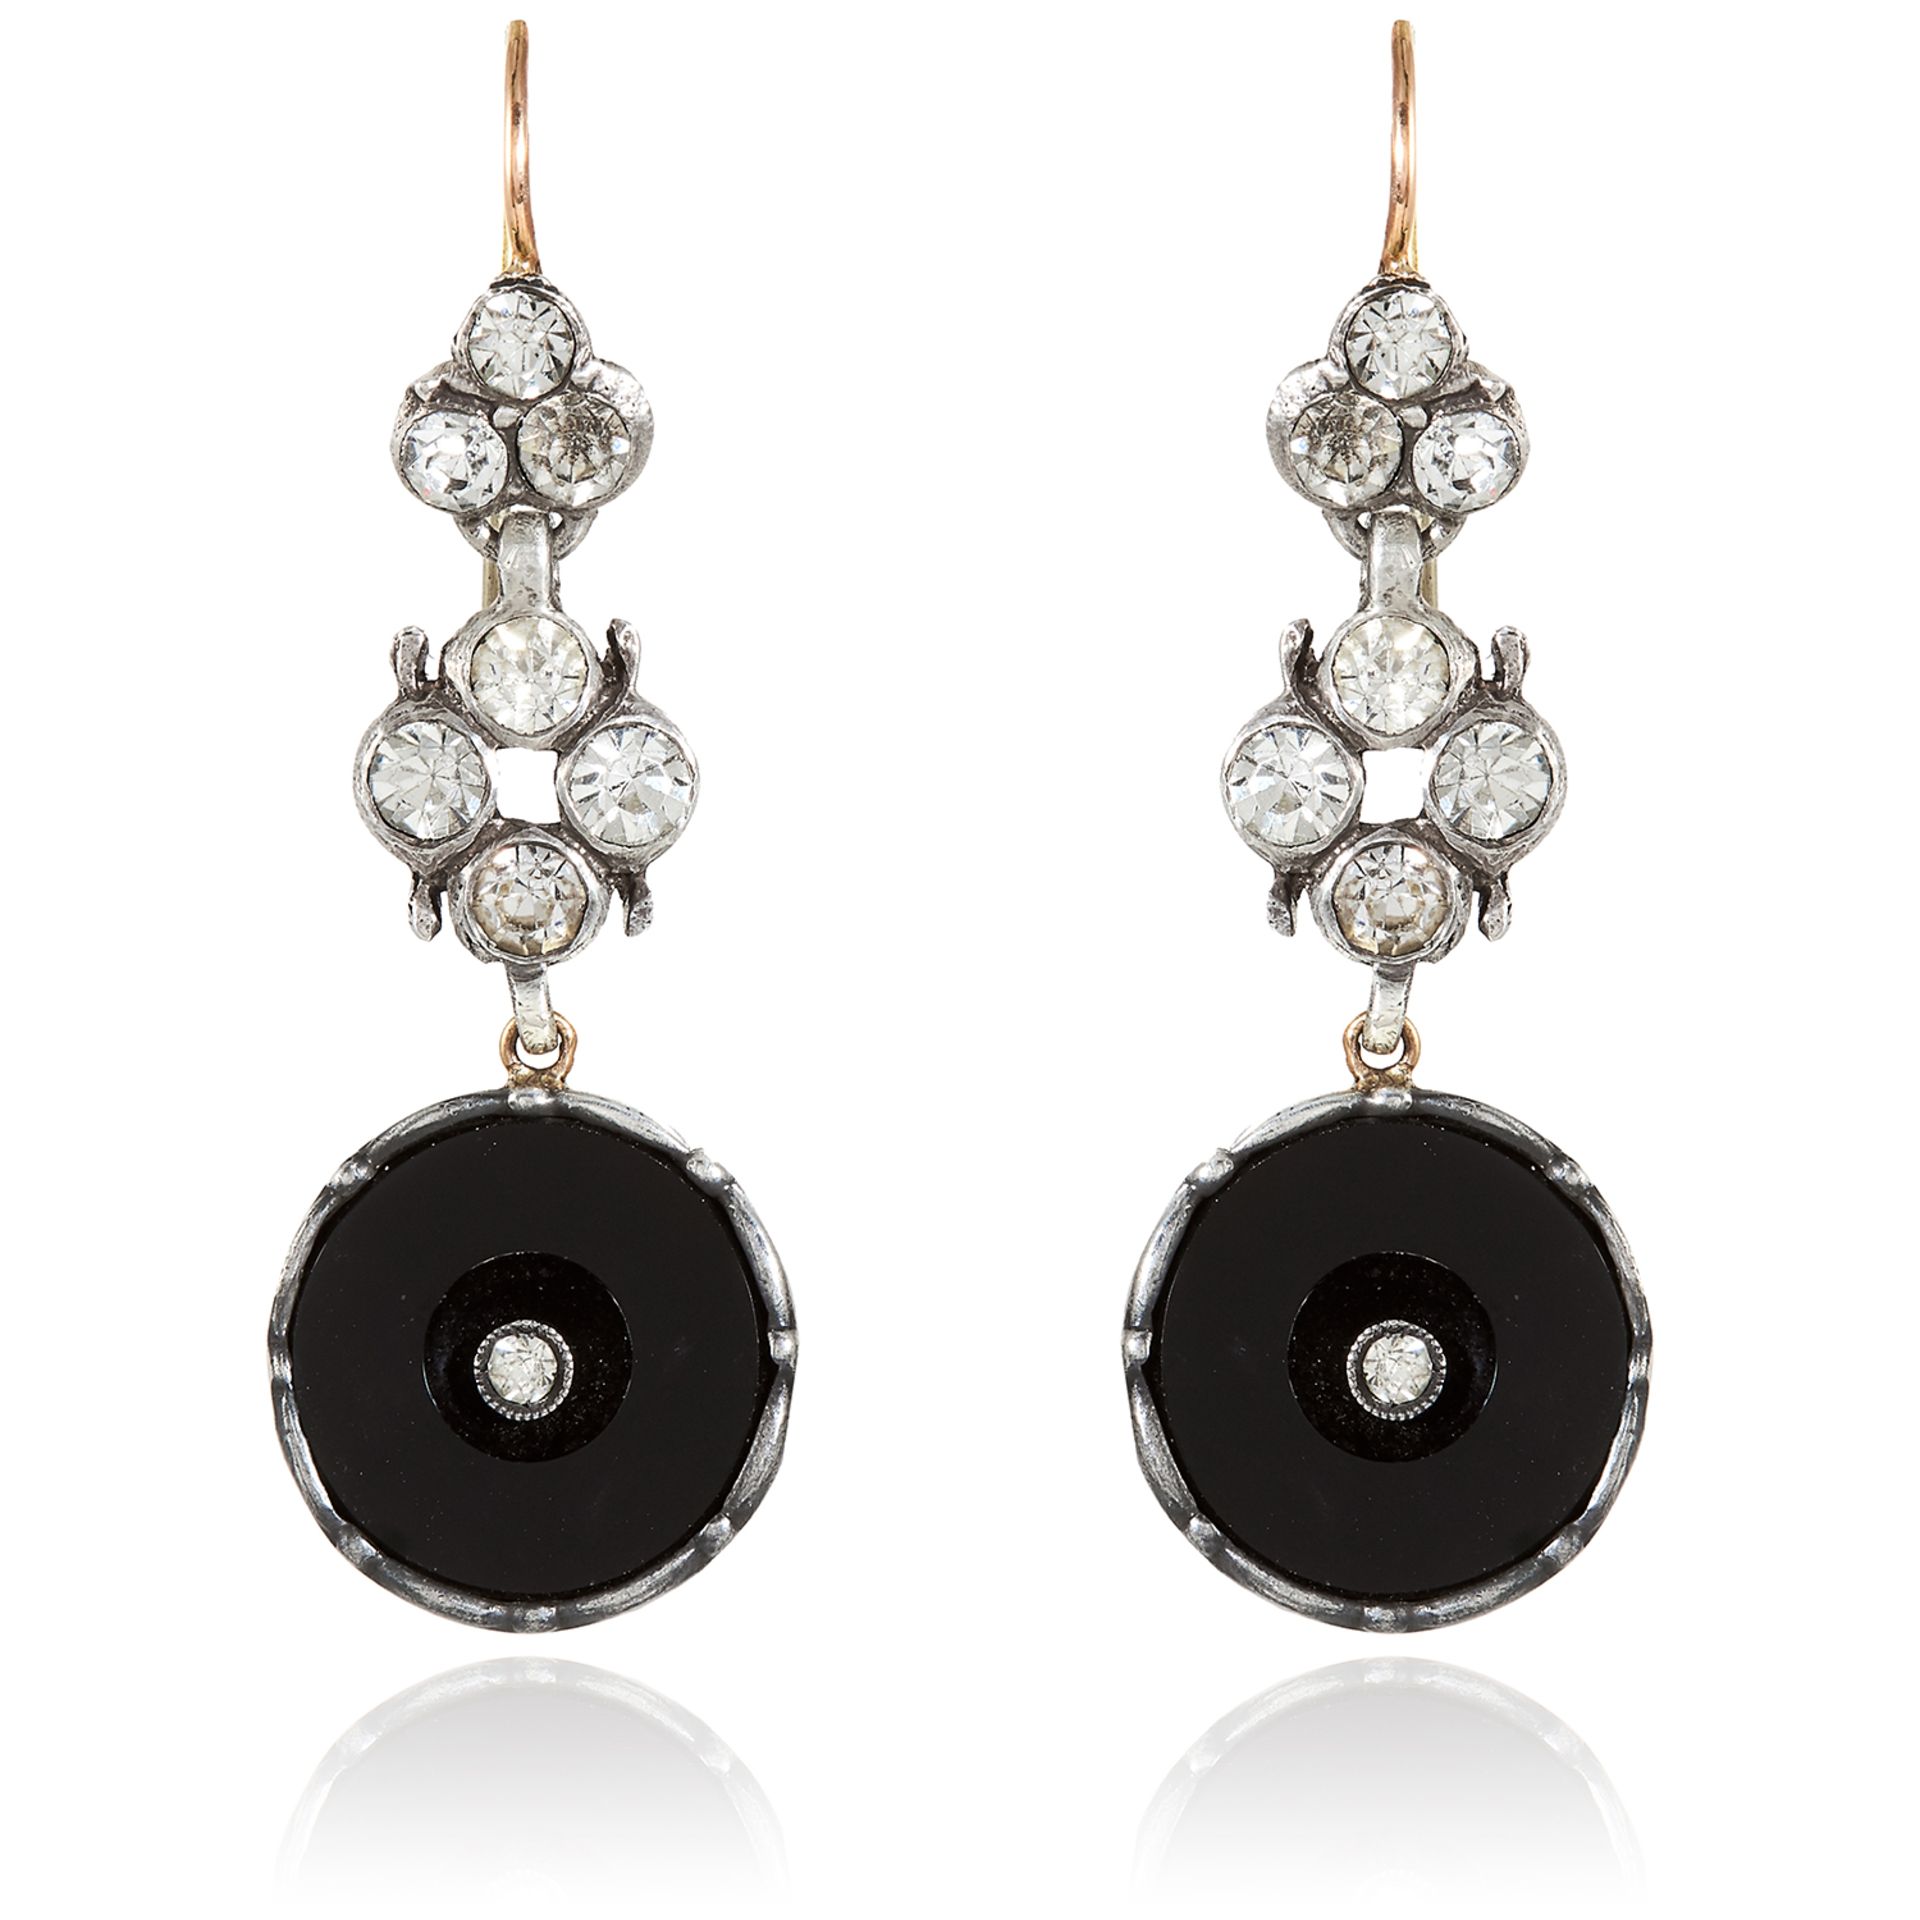 A PAIR OF JEWELLED ONYX EARRINGS in silver and gold, each suspending a circular piece of